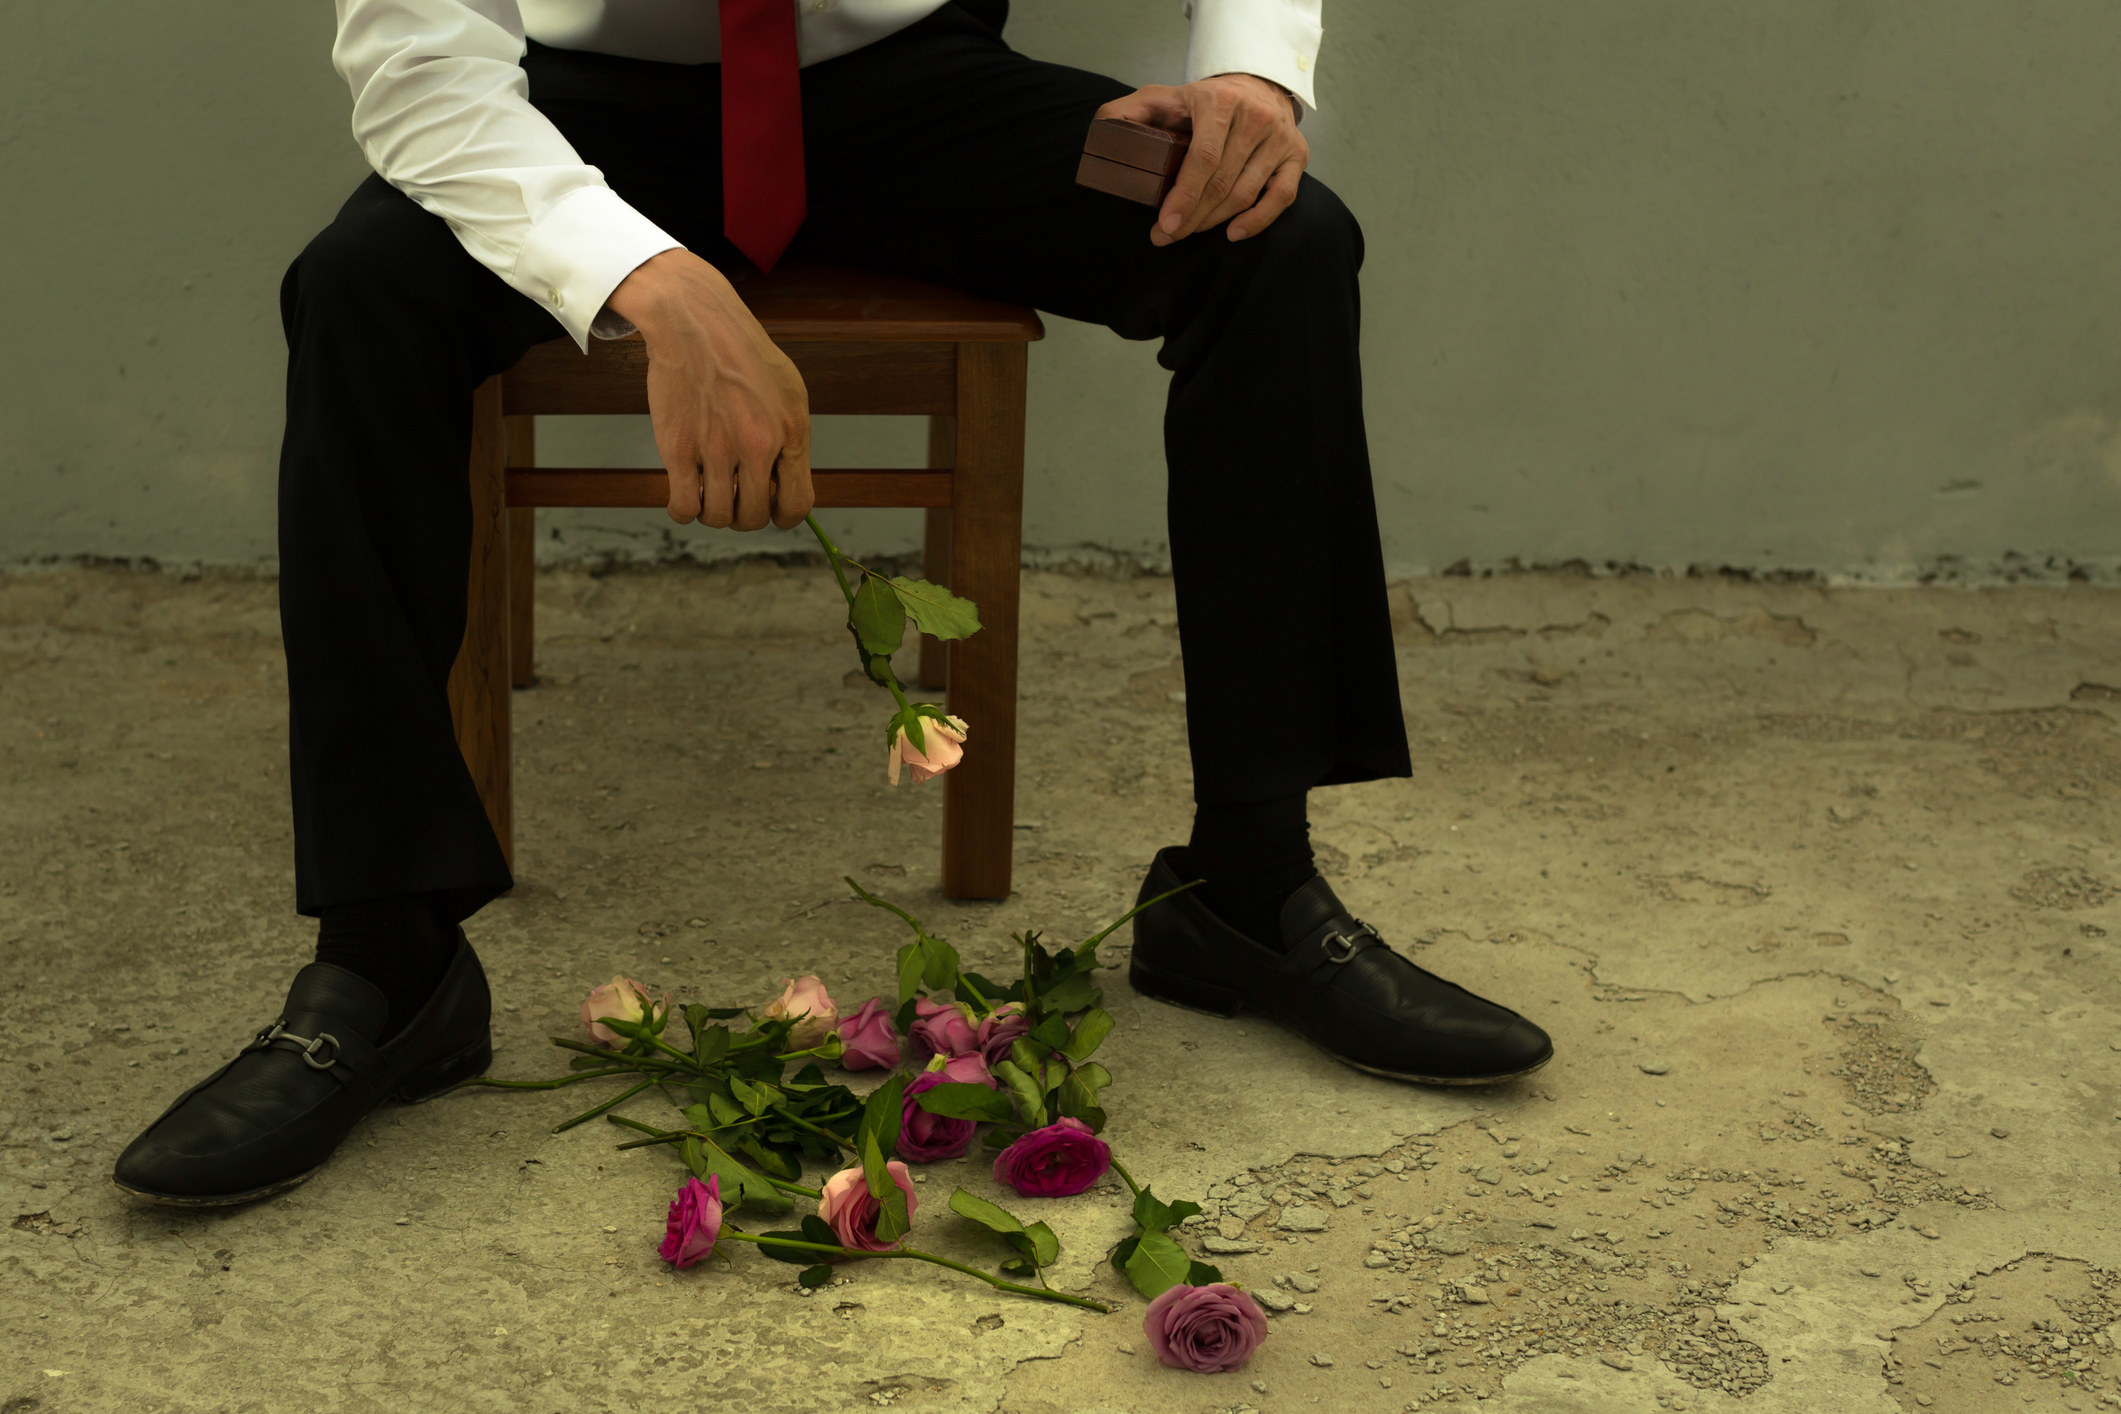 Someone heartbroken sits down, with roses from a bouquet on the floor